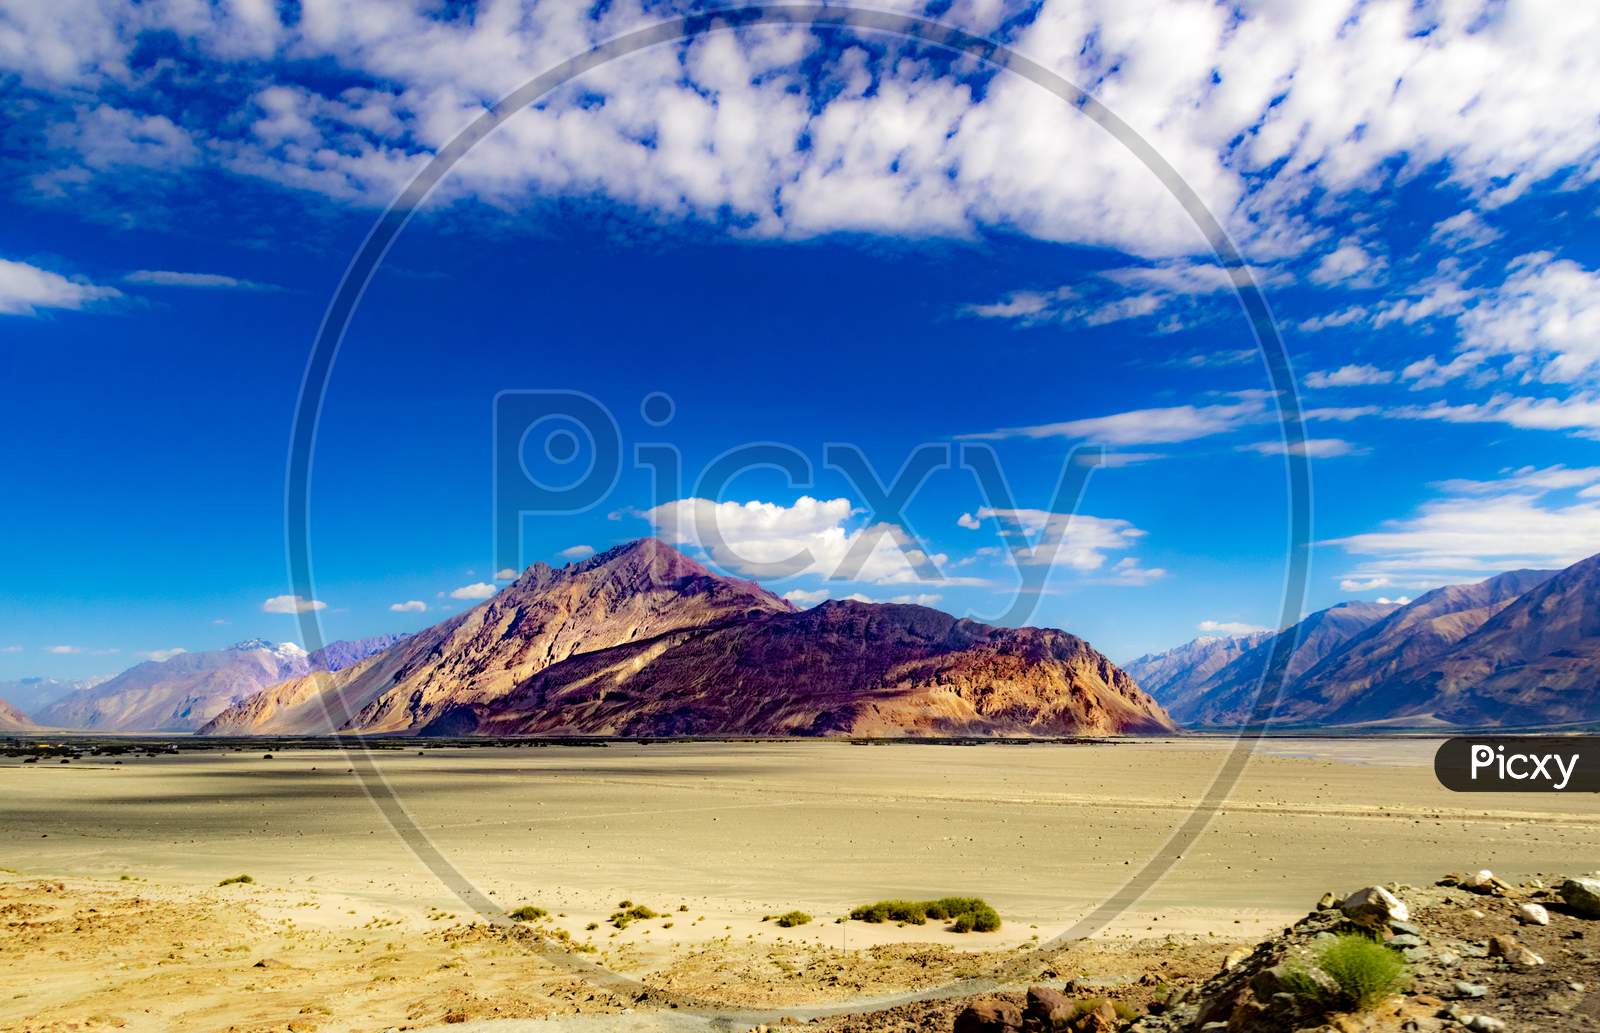 High Dynamic Range Image Of Barren Mountain In A Desert With Deep Blue Sky And White Patchy Clouds In Ladakh, Jammu And Kashmir, India